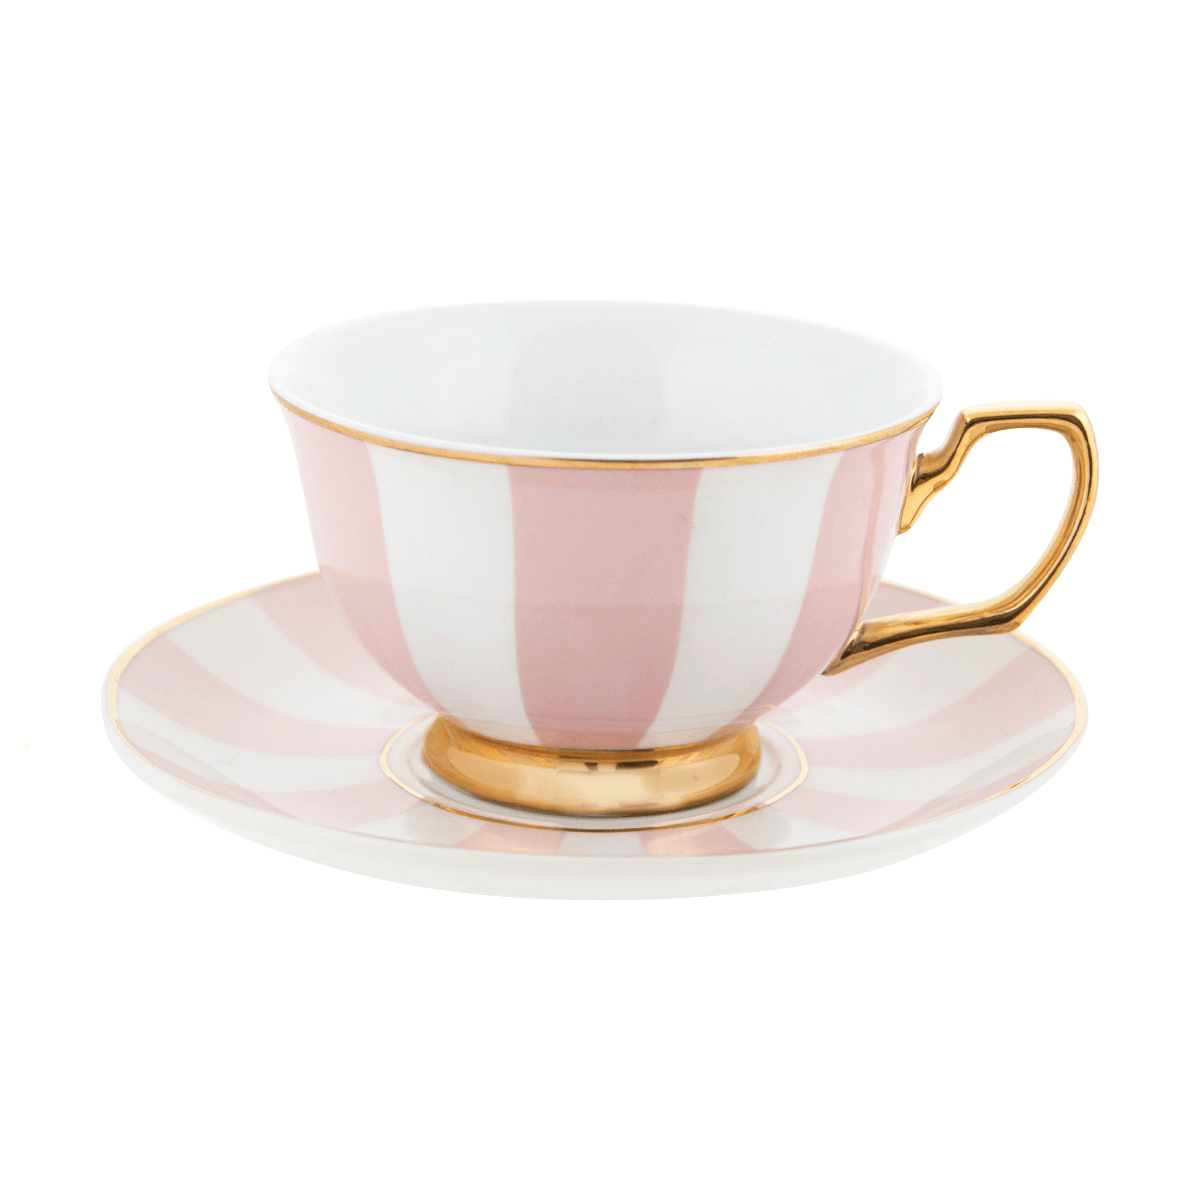 Experience Pink Tea Box Tea in style, with this exquisite range made from the finest quality new bone china is available in delicate pastels, polka dots and stripes. This classic mix and match range is perfect for those who appreciate fine design and love to collect vintage inspired teaware